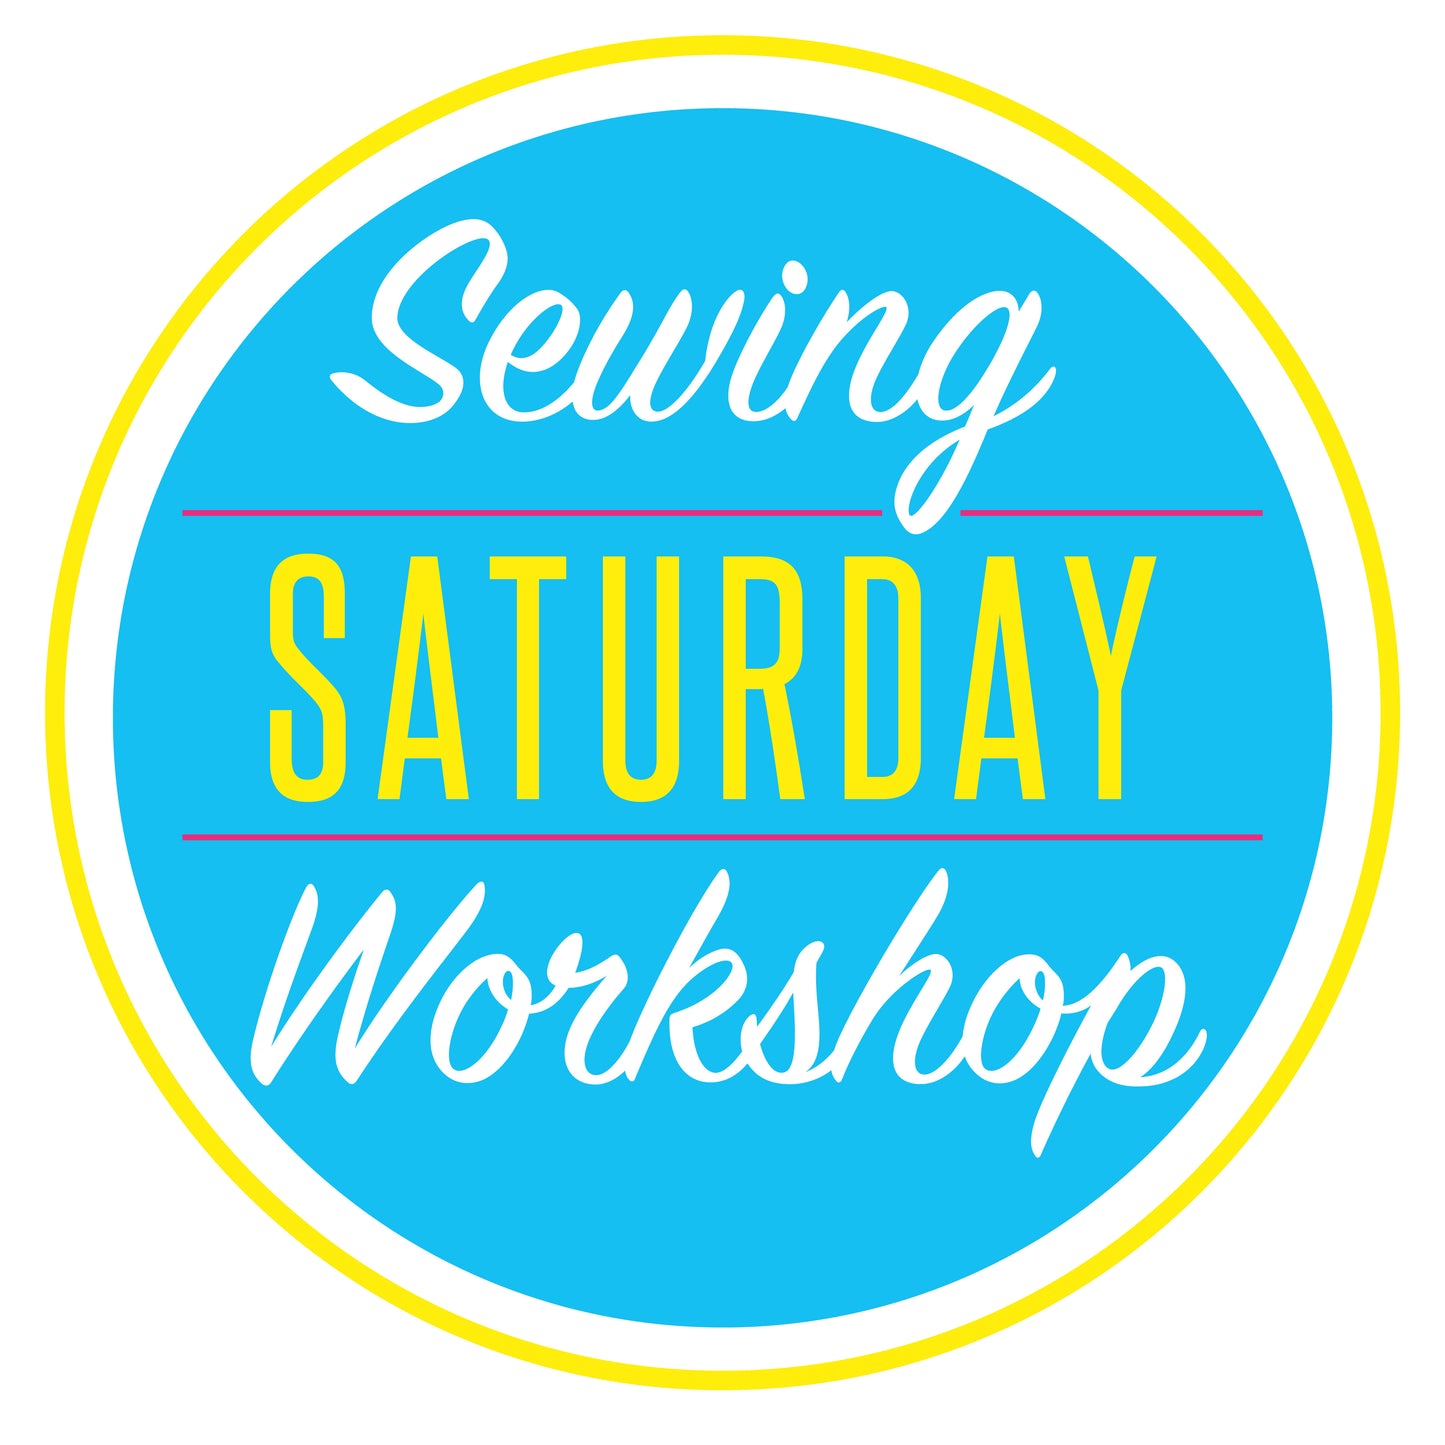 Sewing Workshop: Saturday, August 31, 9am-3pm